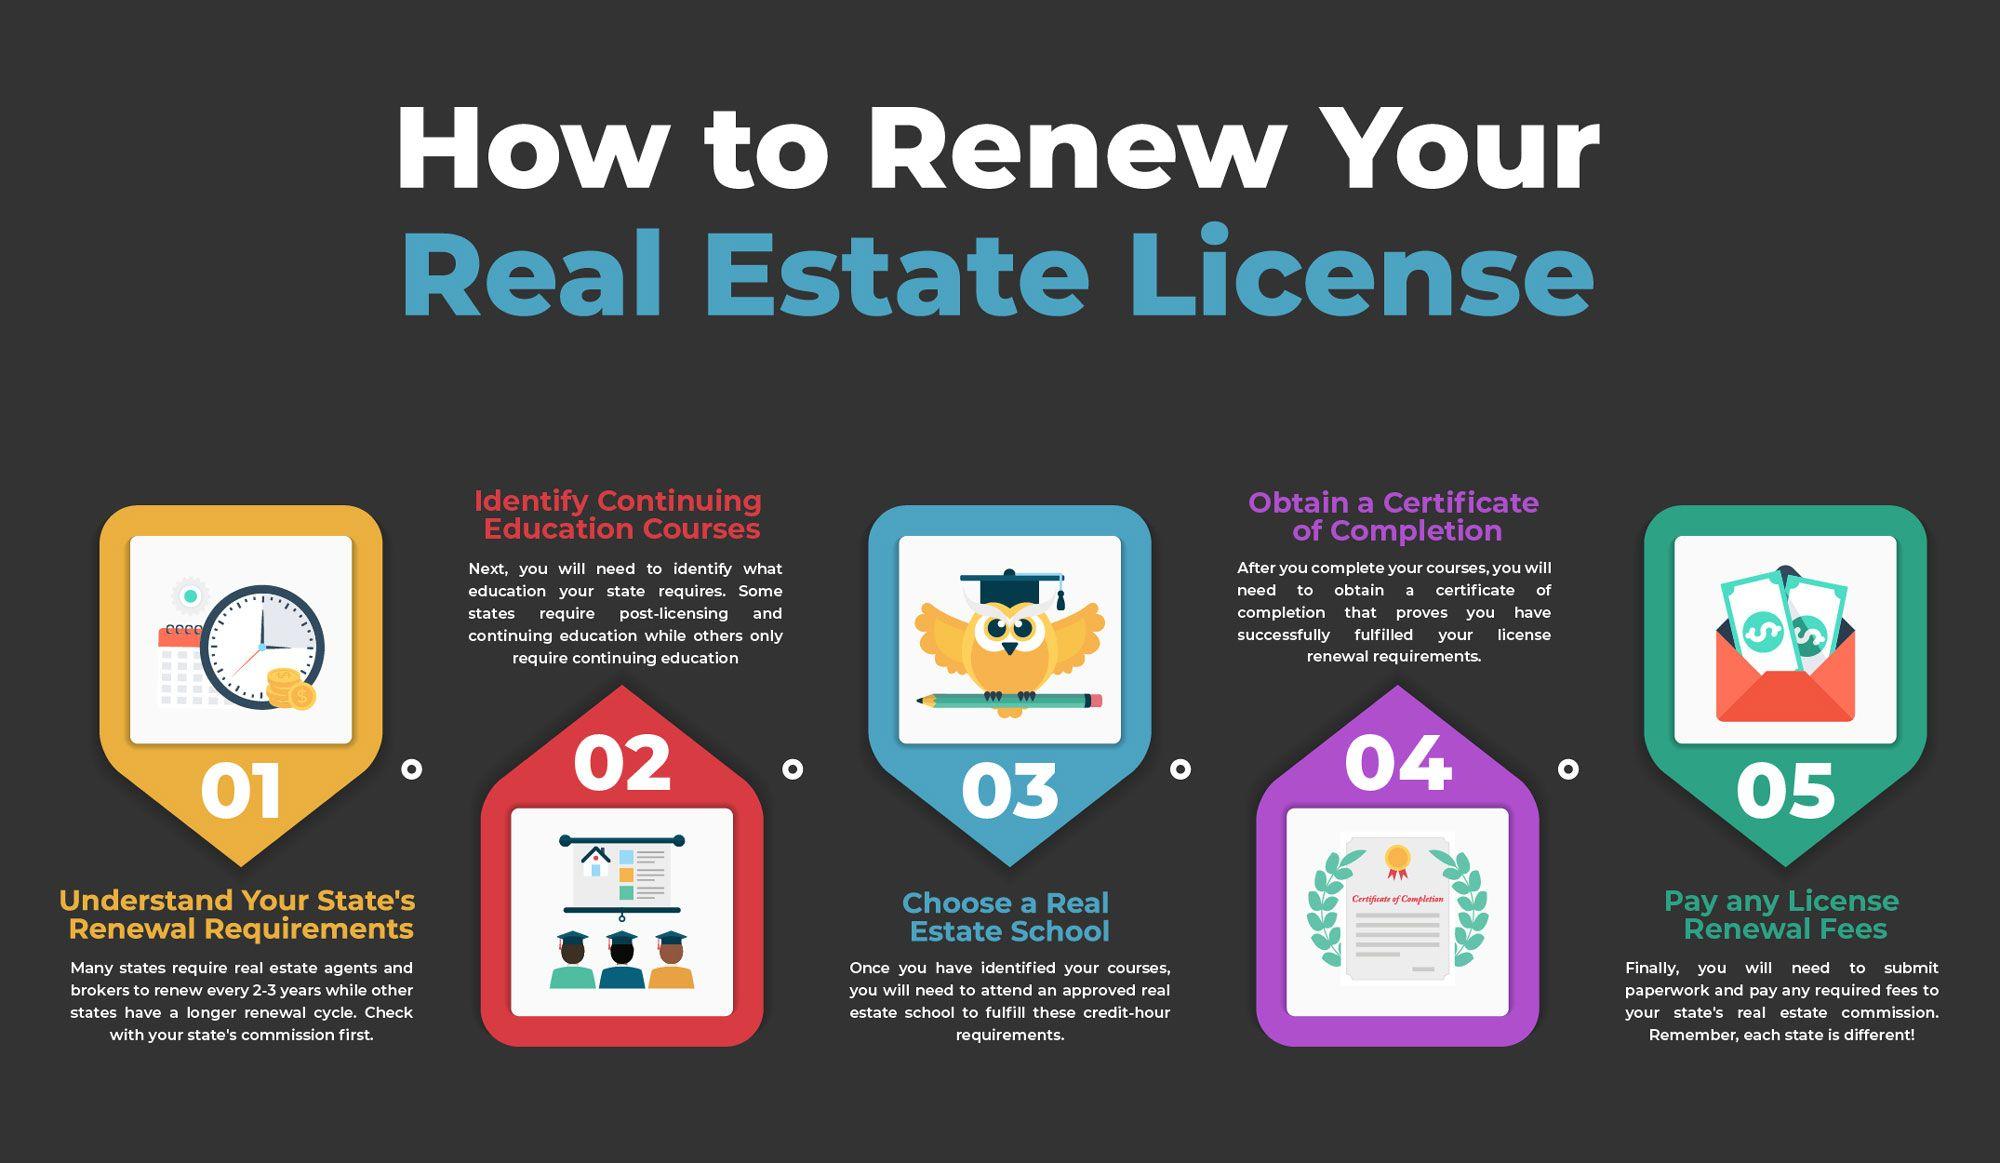 How many hours of continuing education are required for real estate license renewal